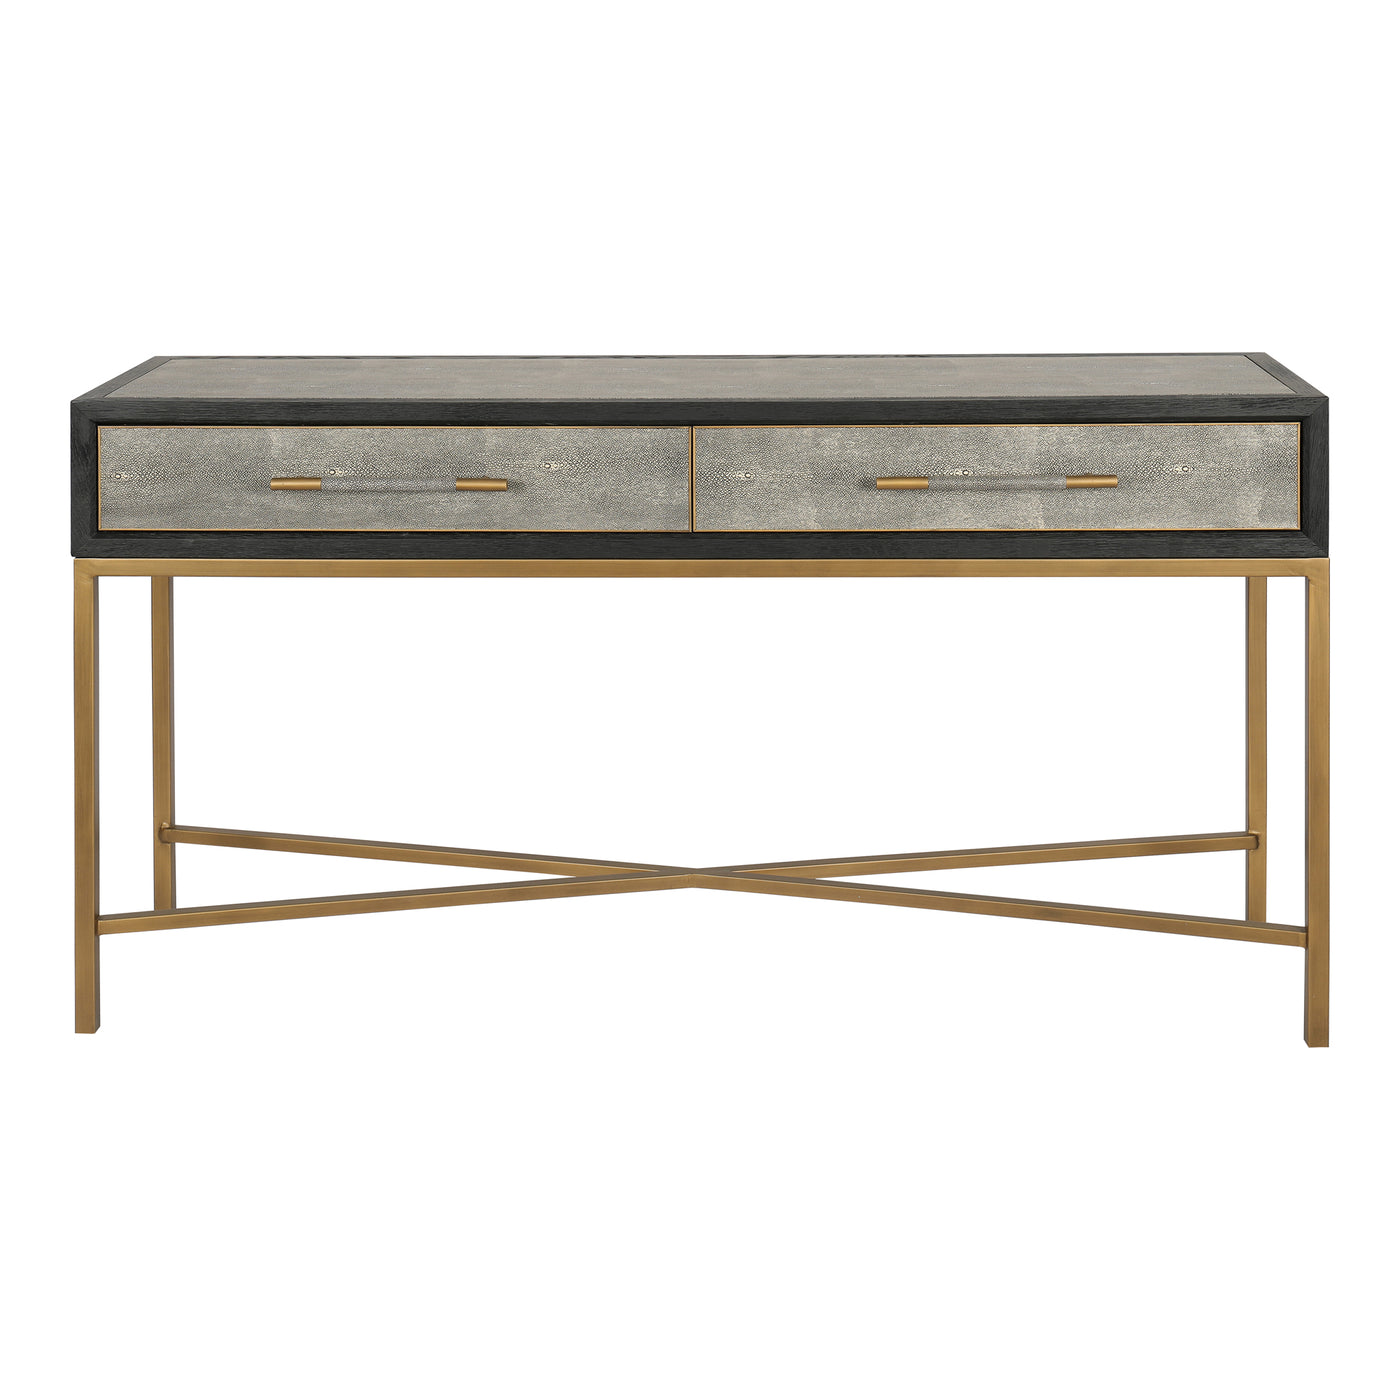 The Mako Console Table is a classy affair of solid oak. Brass legs and handles instill this piece of furniture with a feel...